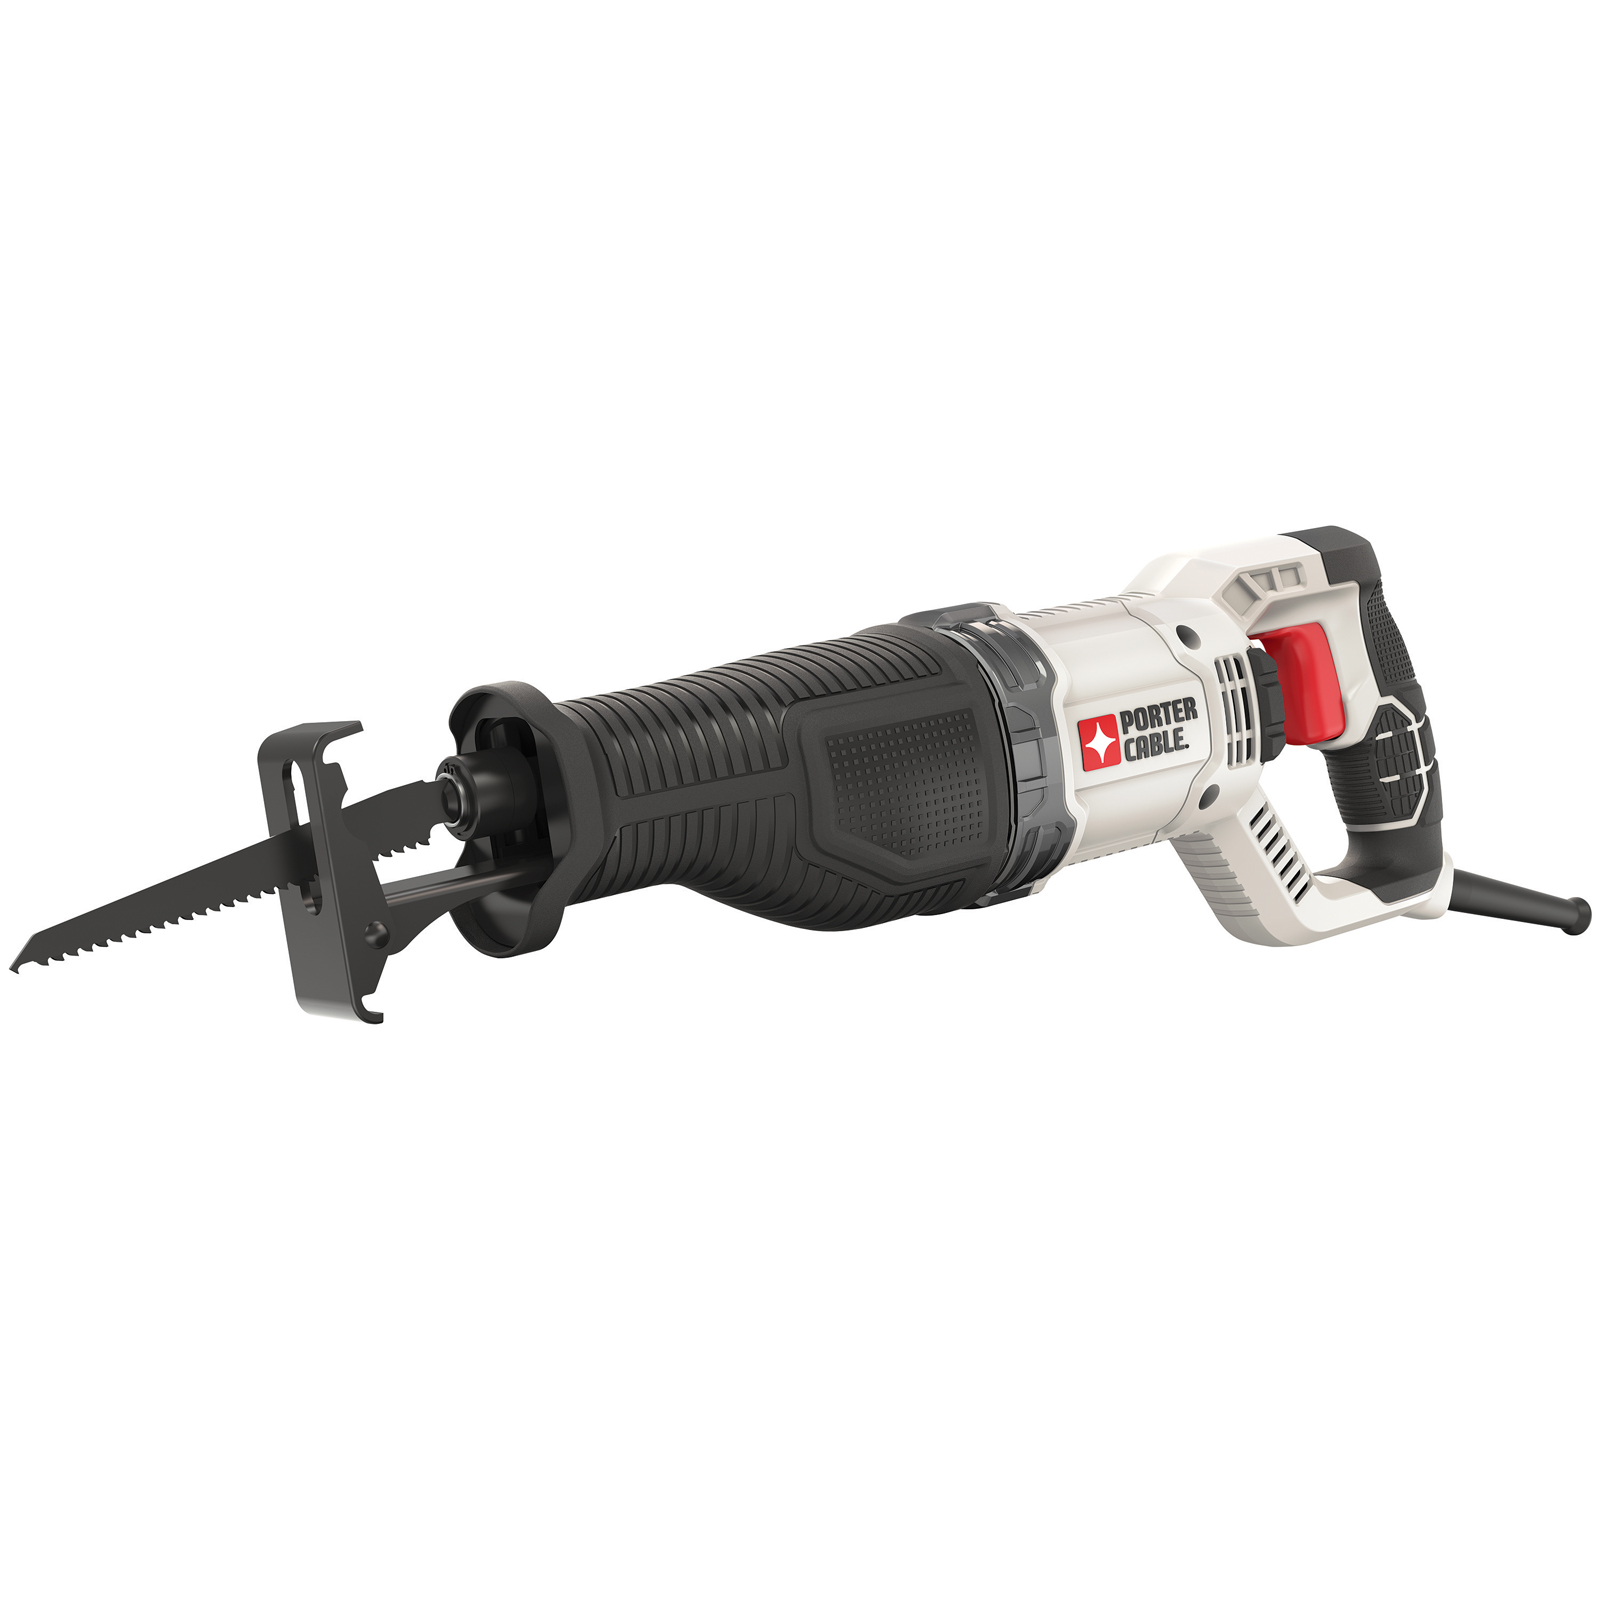 Porter-Cable Porter Cable PCE360 7.5 Amp Variable Speed Reciprocating Saw